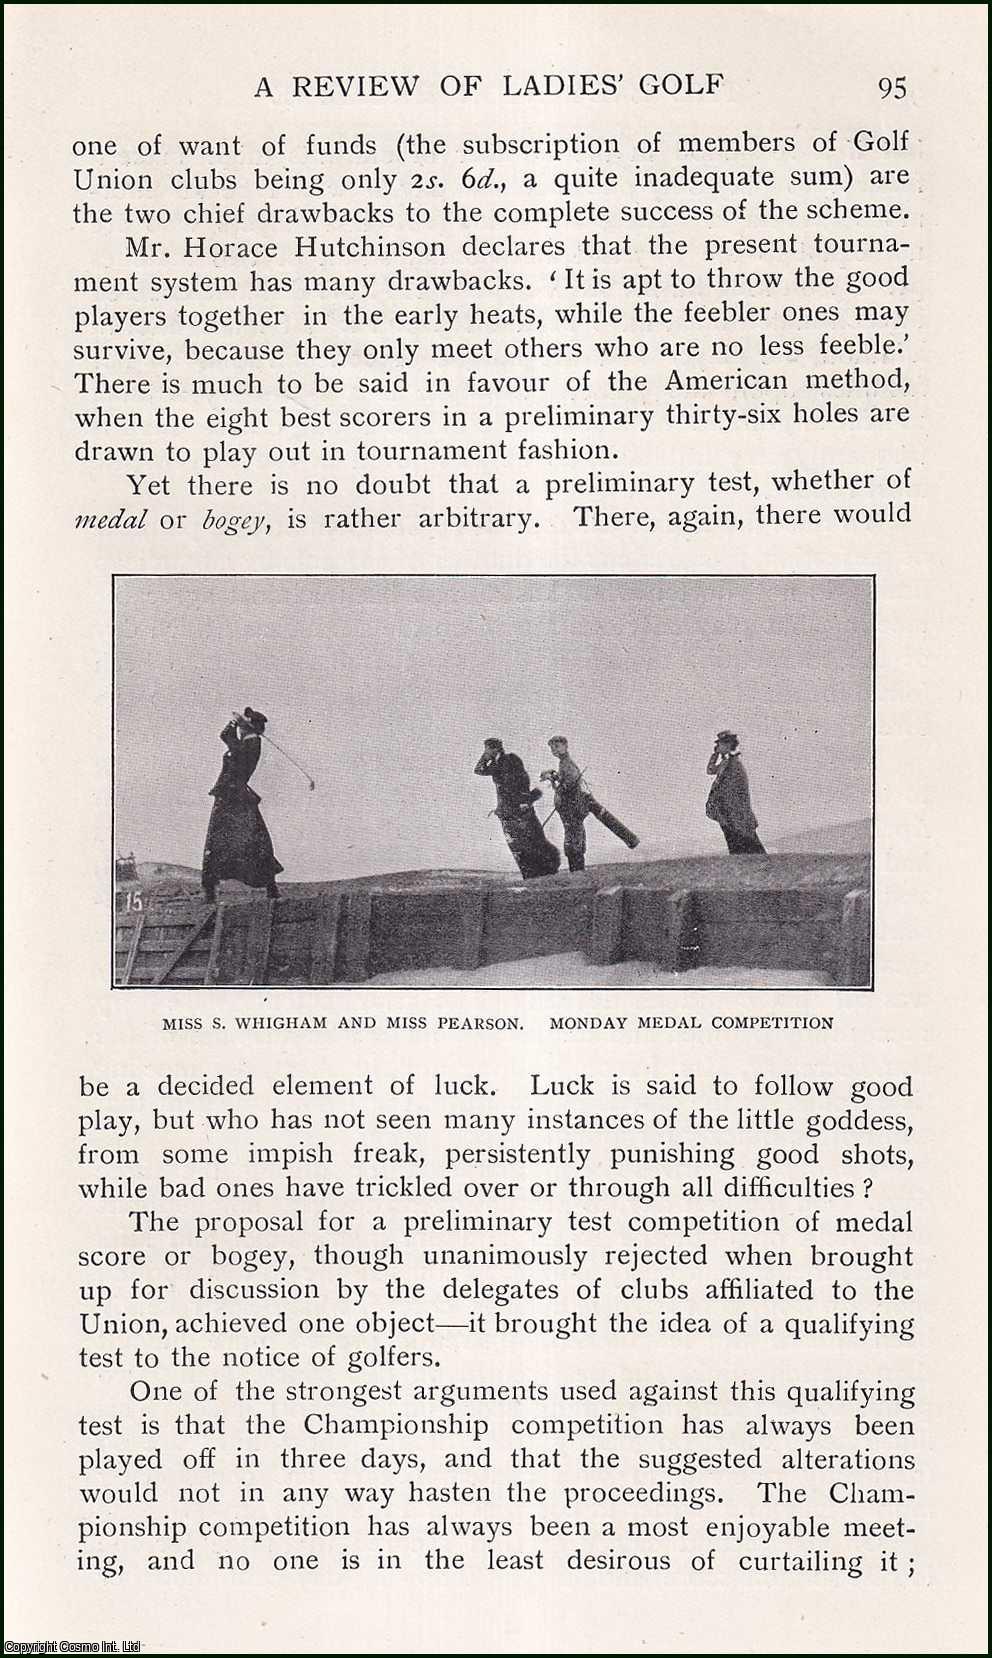 L. Mackern and E. M. Boys. - A Review of Ladies Golf. An uncommon original article from the Badminton Magazine, 1900.